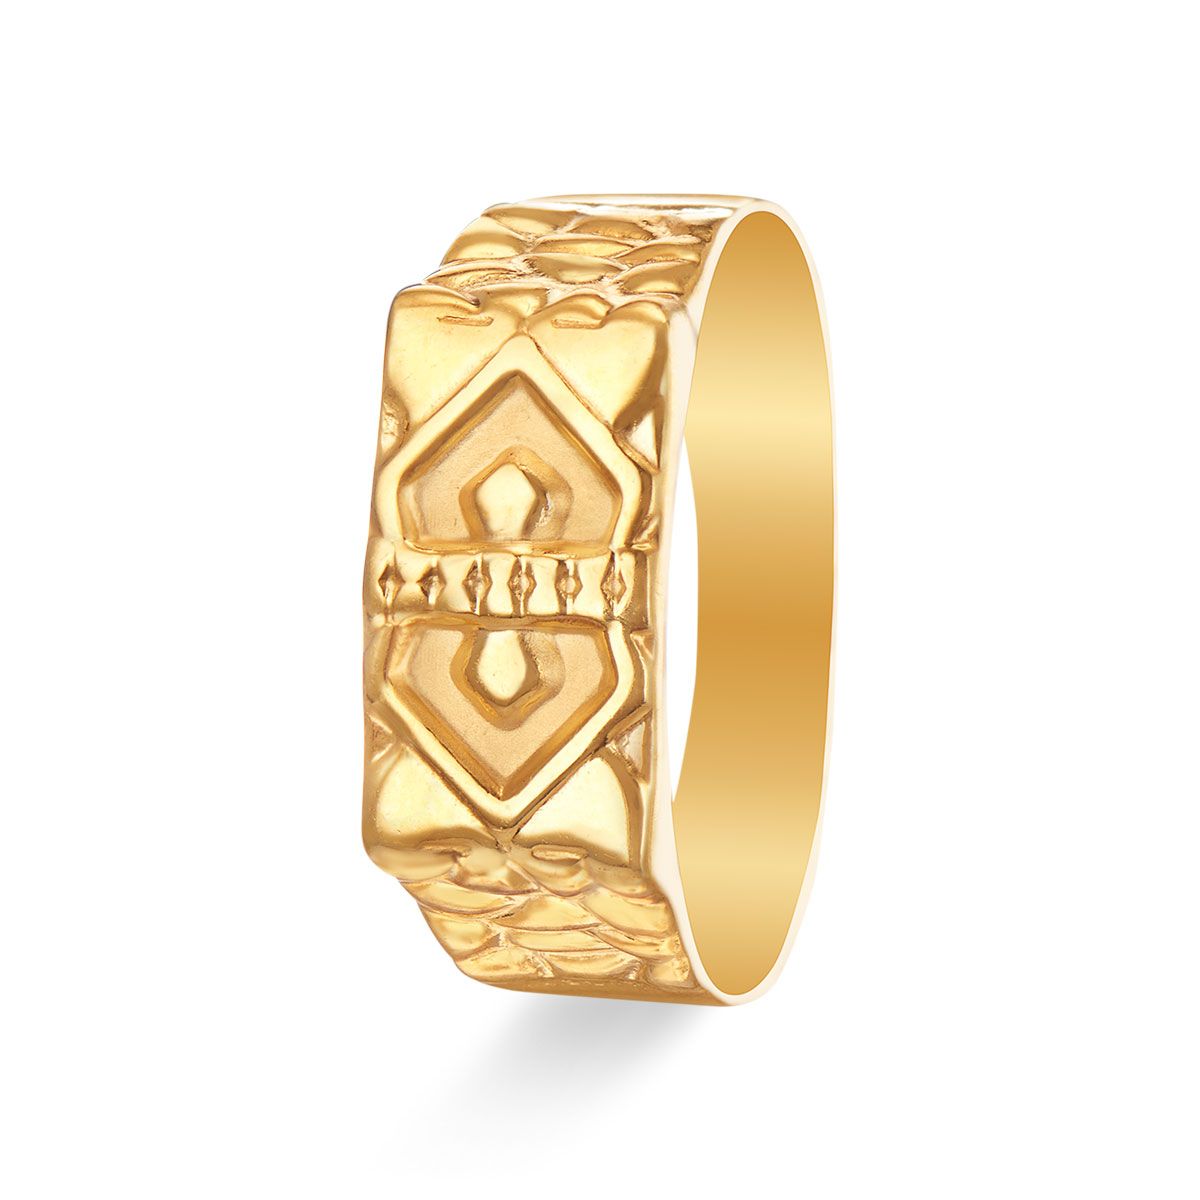 LATEST GOLD RING DESIGNS FOR MEN WITH WEIGHT - YouTube | Gold ring designs, Latest  gold ring designs, Mens ring designs